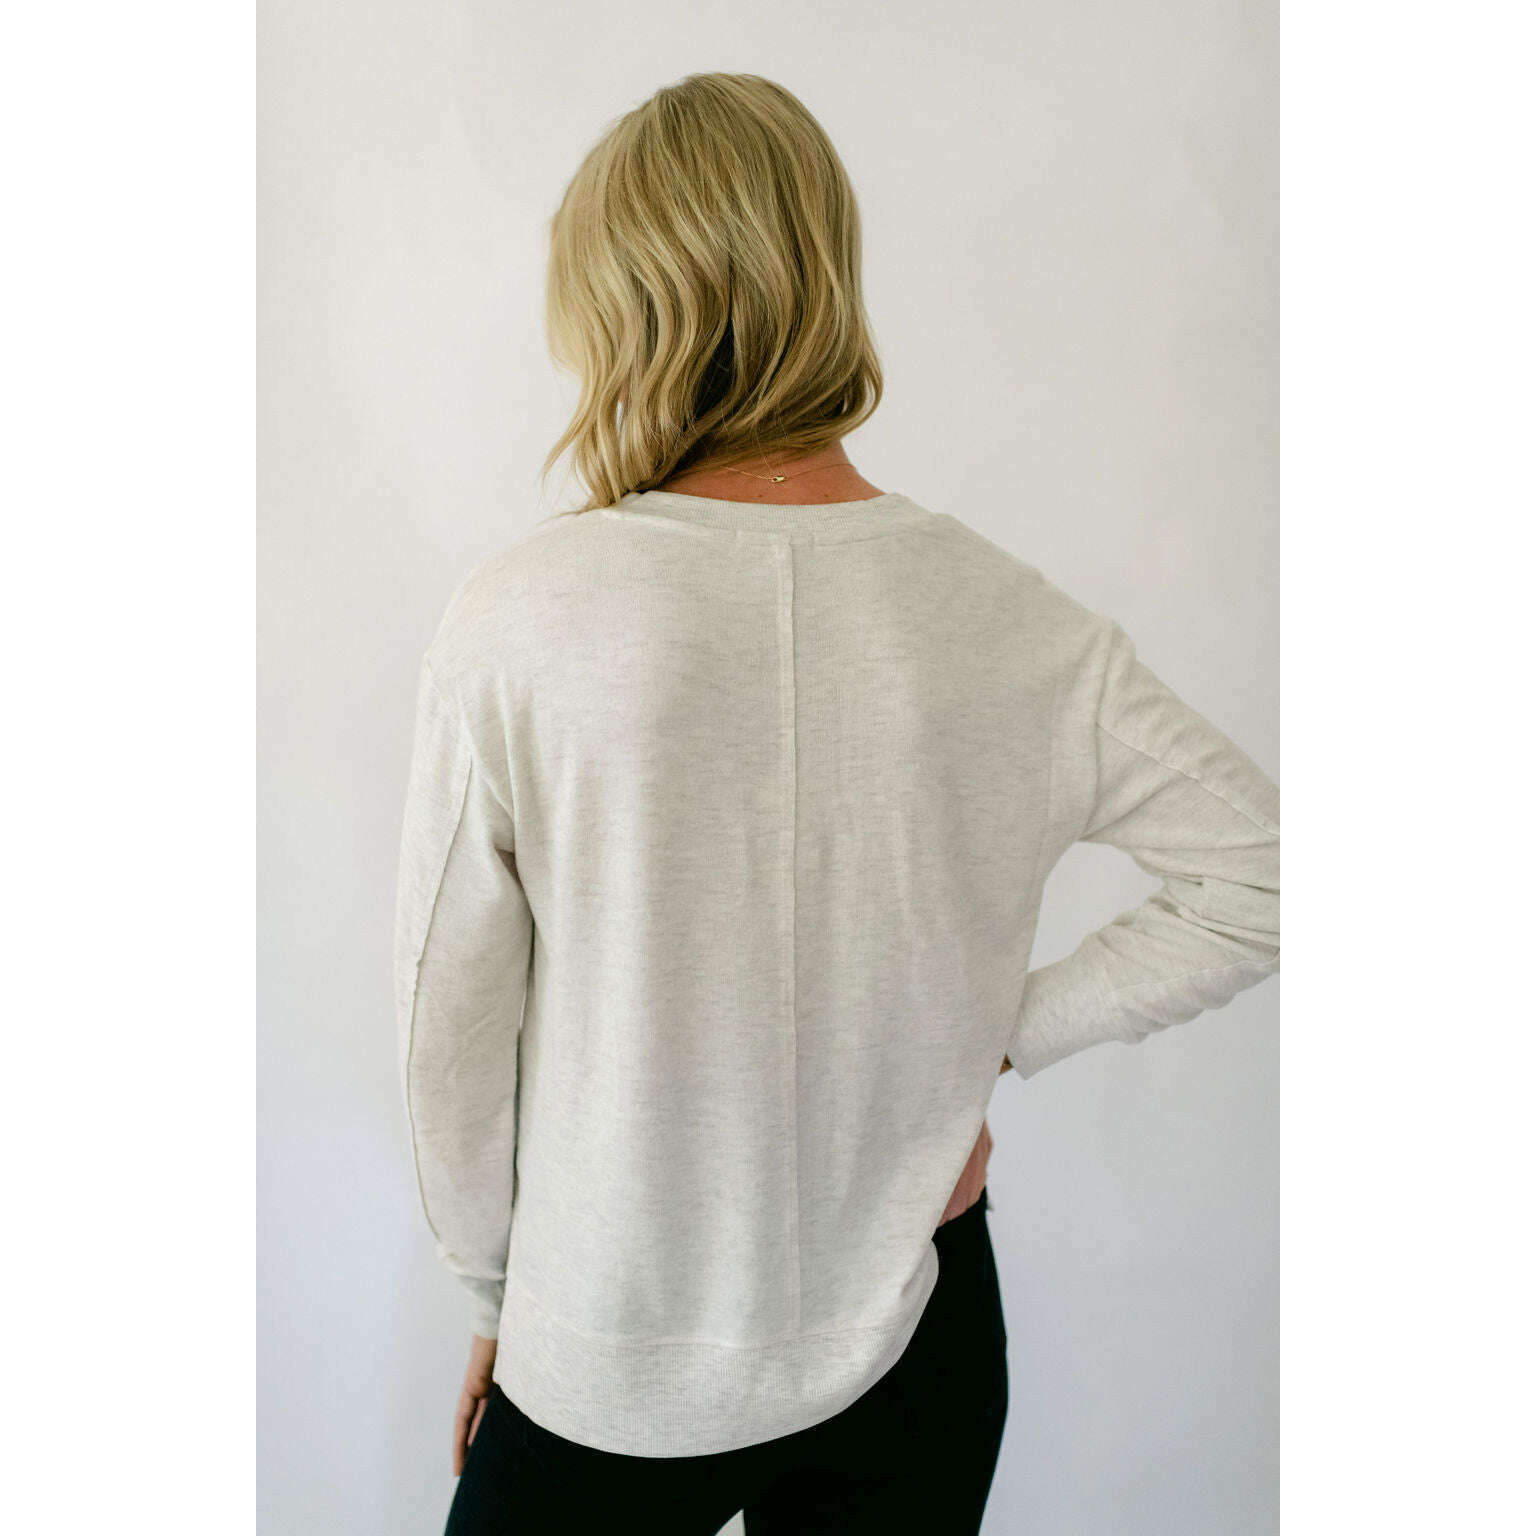 8.28 Boutique:Z-Supply,Z-Supply Wilder Cloud V-Neck Top Light Oatmeal,Sweaters